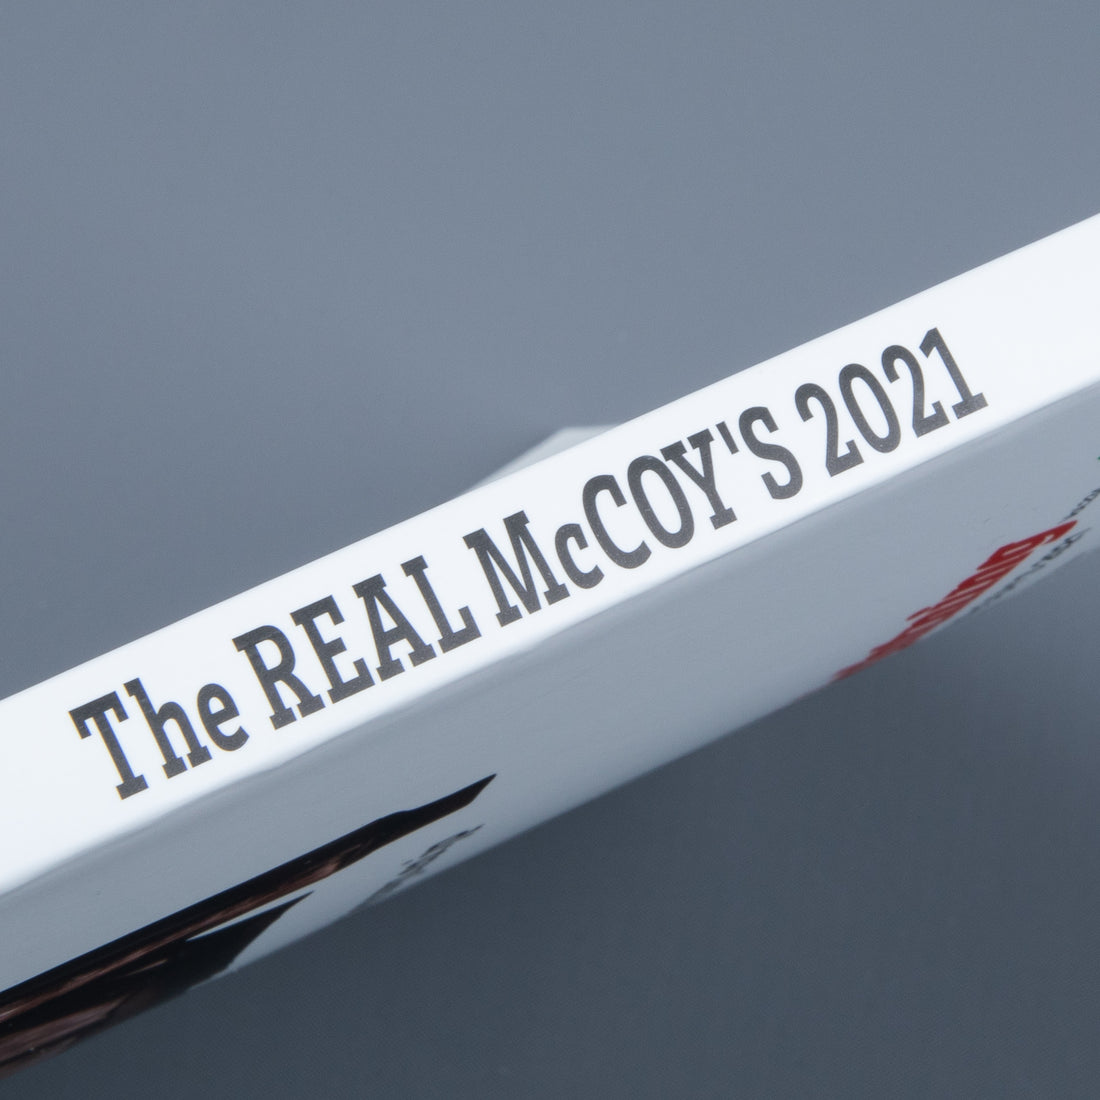 The Real McCoy's Yearbook 2021